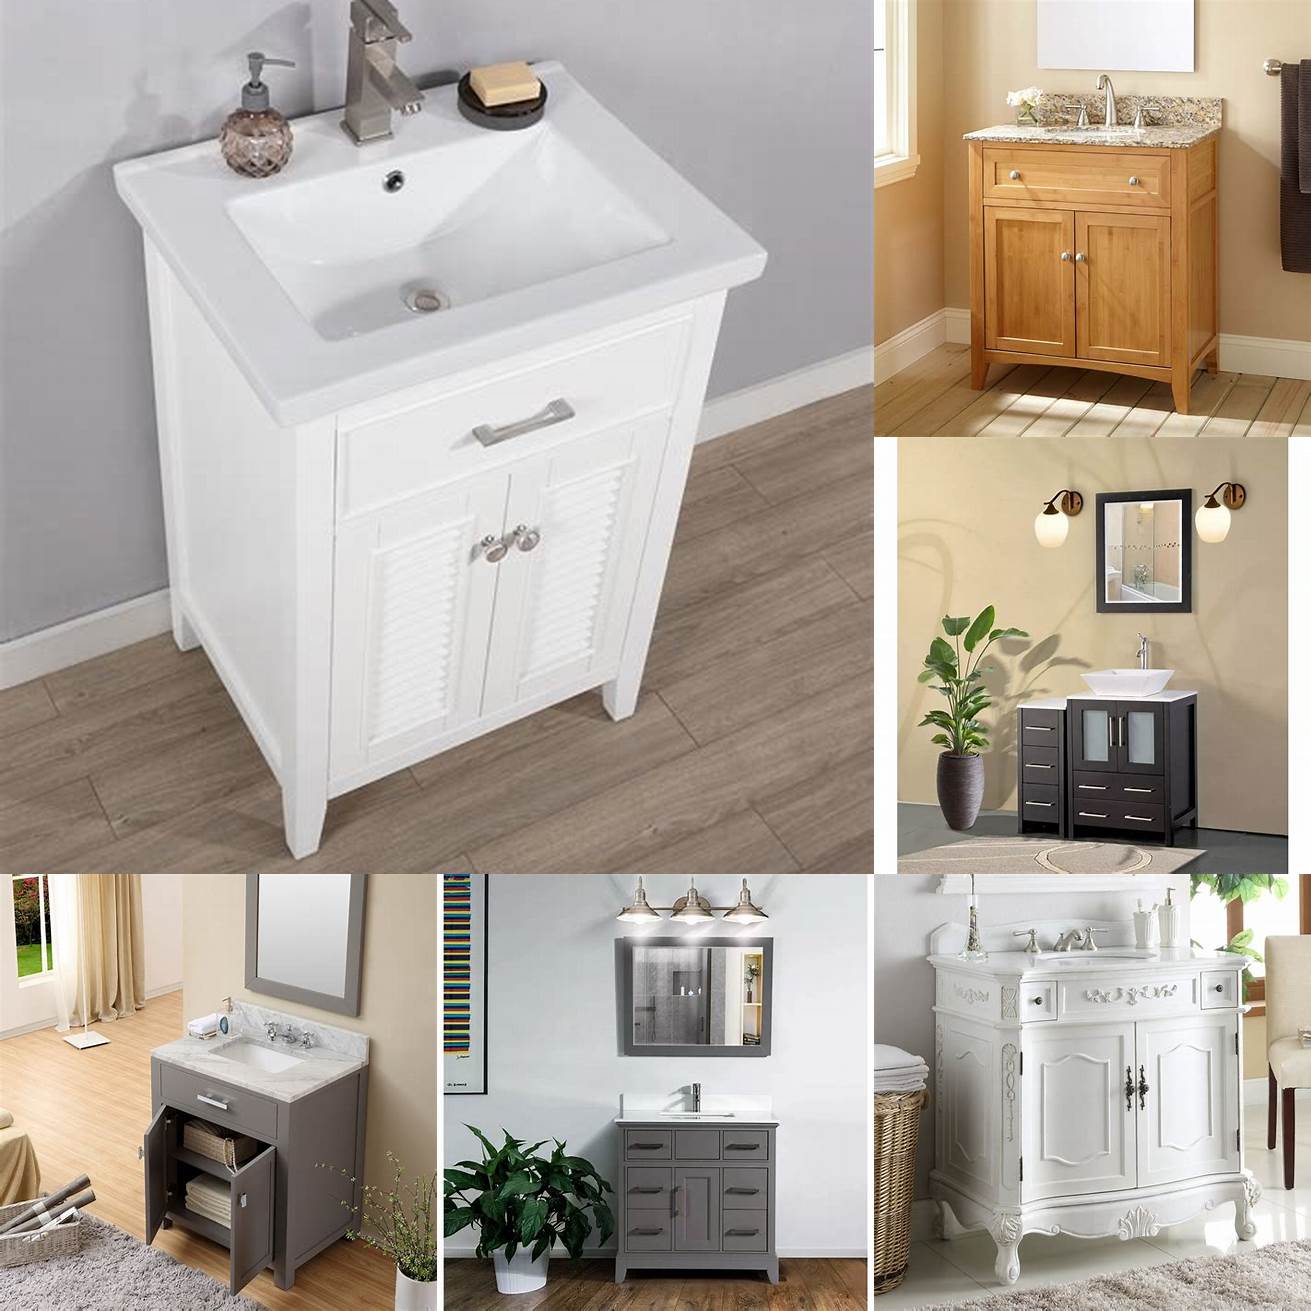 The vanity is affordable and offers great value for money